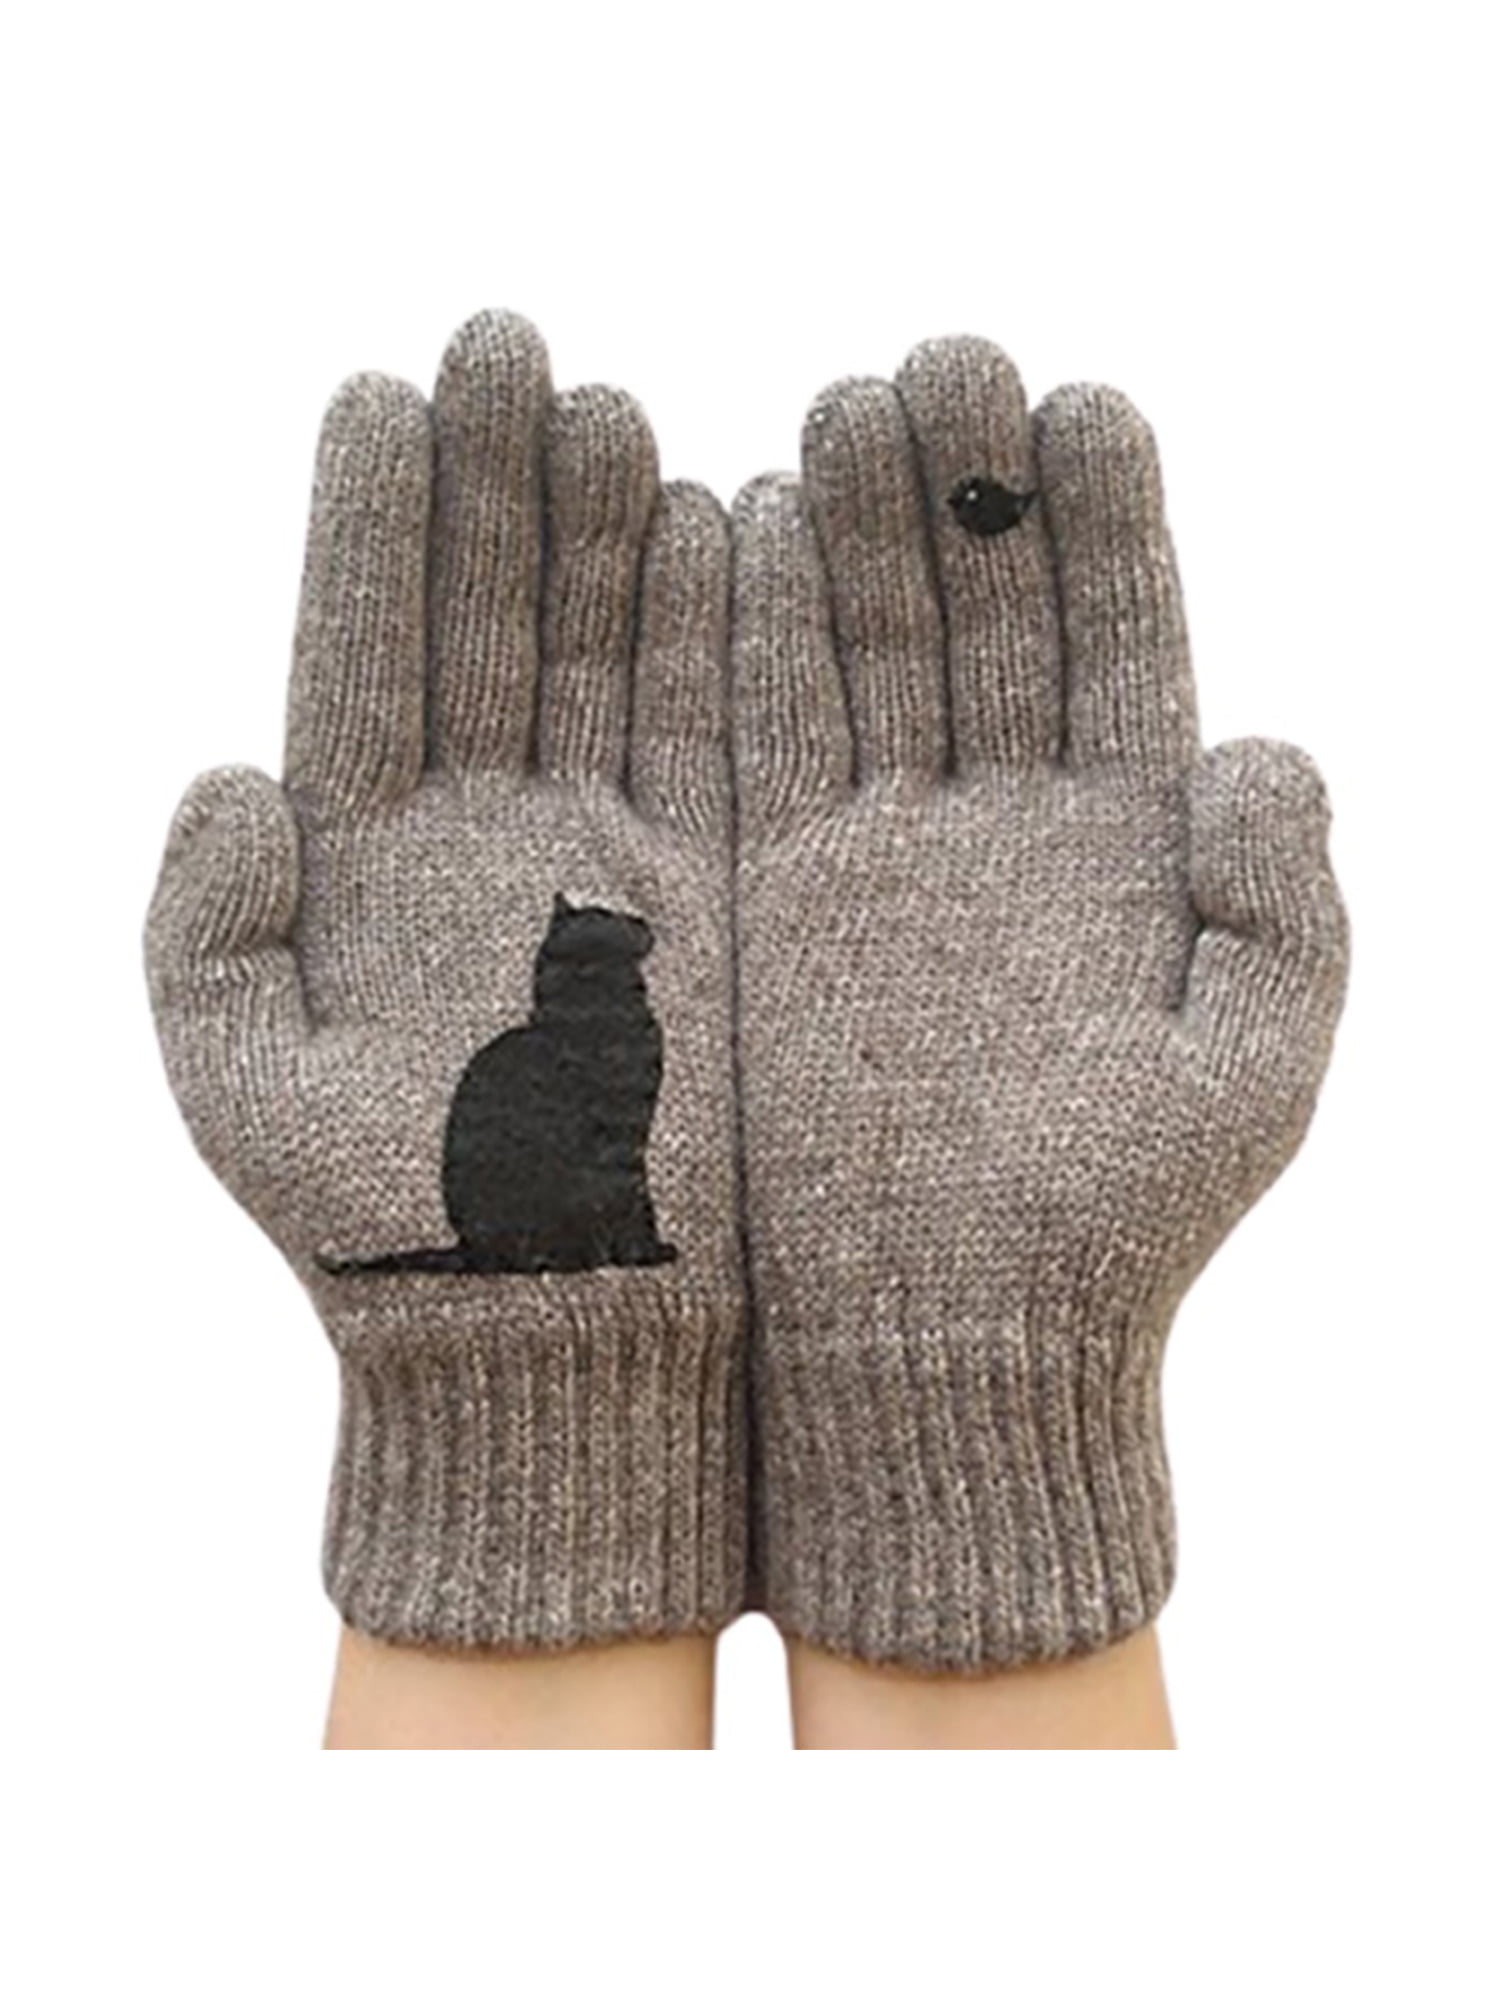 Women's NEW Fashion Touch Screen Warm Winter Thick Gloves Faux Fur Fleece Casual 